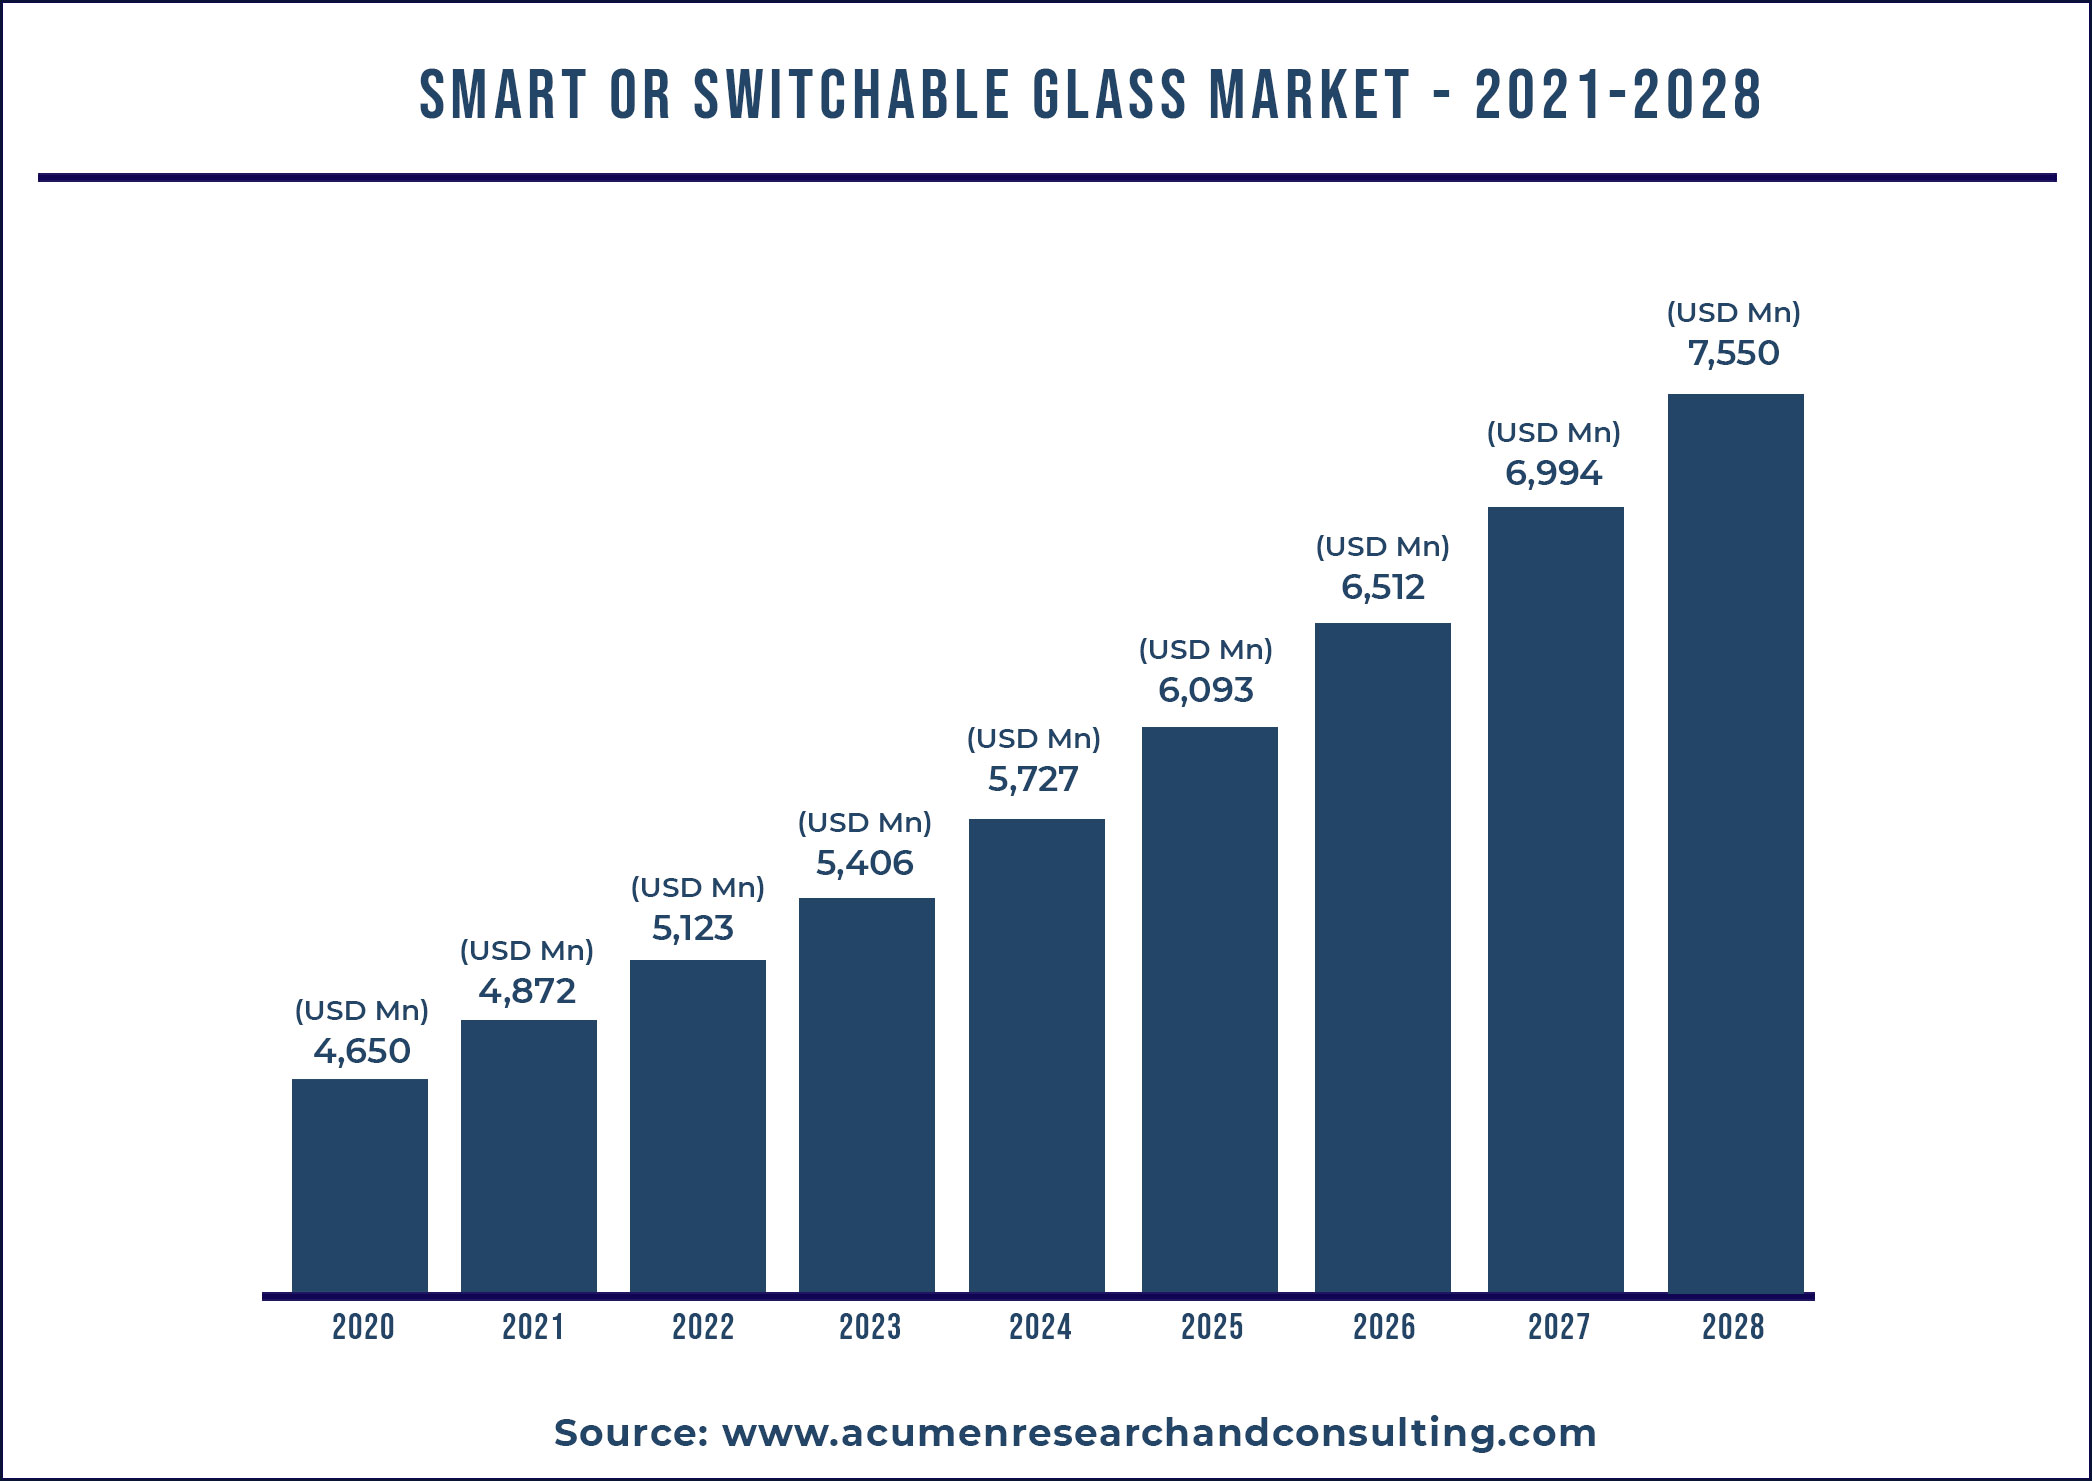 Smart or Switchable Glass Market Research Reports 2021 - 2028